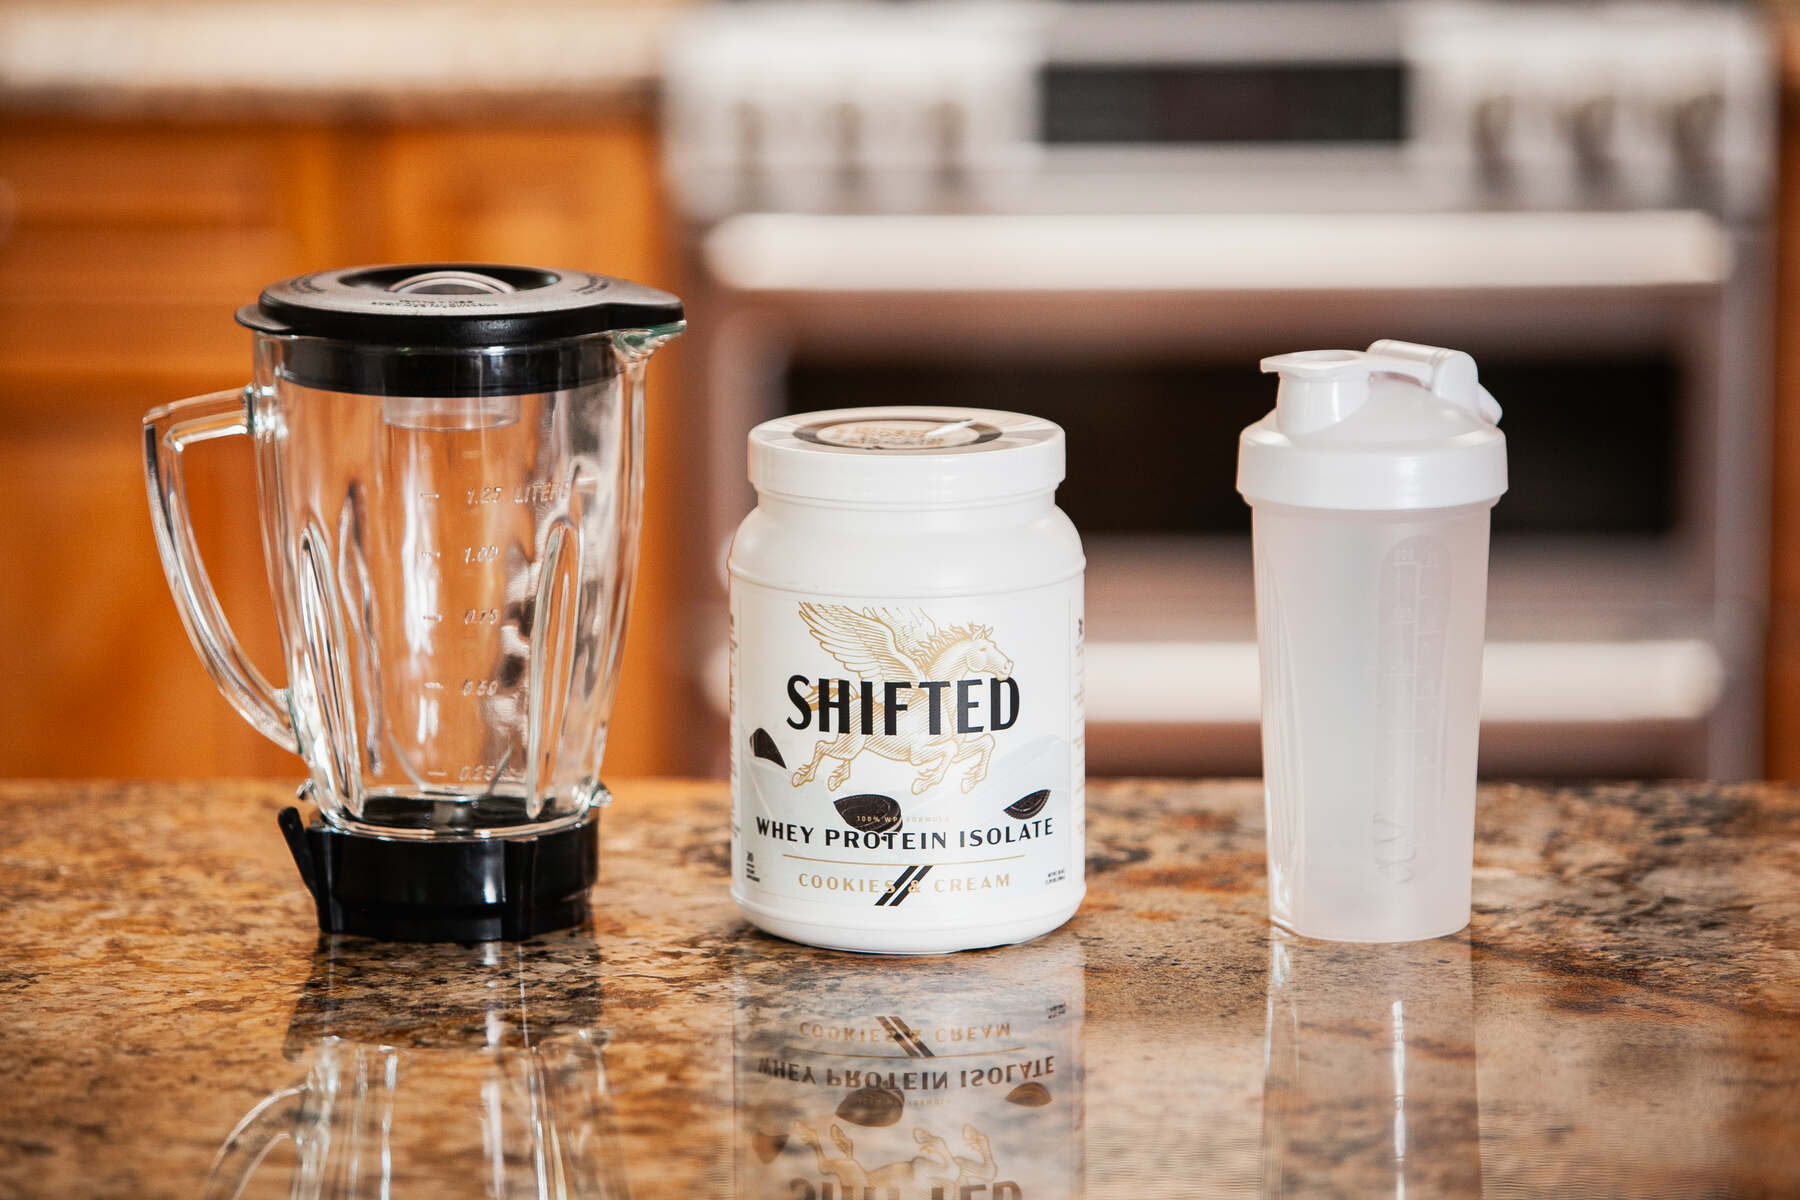 A container of "SHIFTED" Whey Protein Isolate in Cookie & Cream flavor, with a blender and a shaker bottle on a kitchen counter